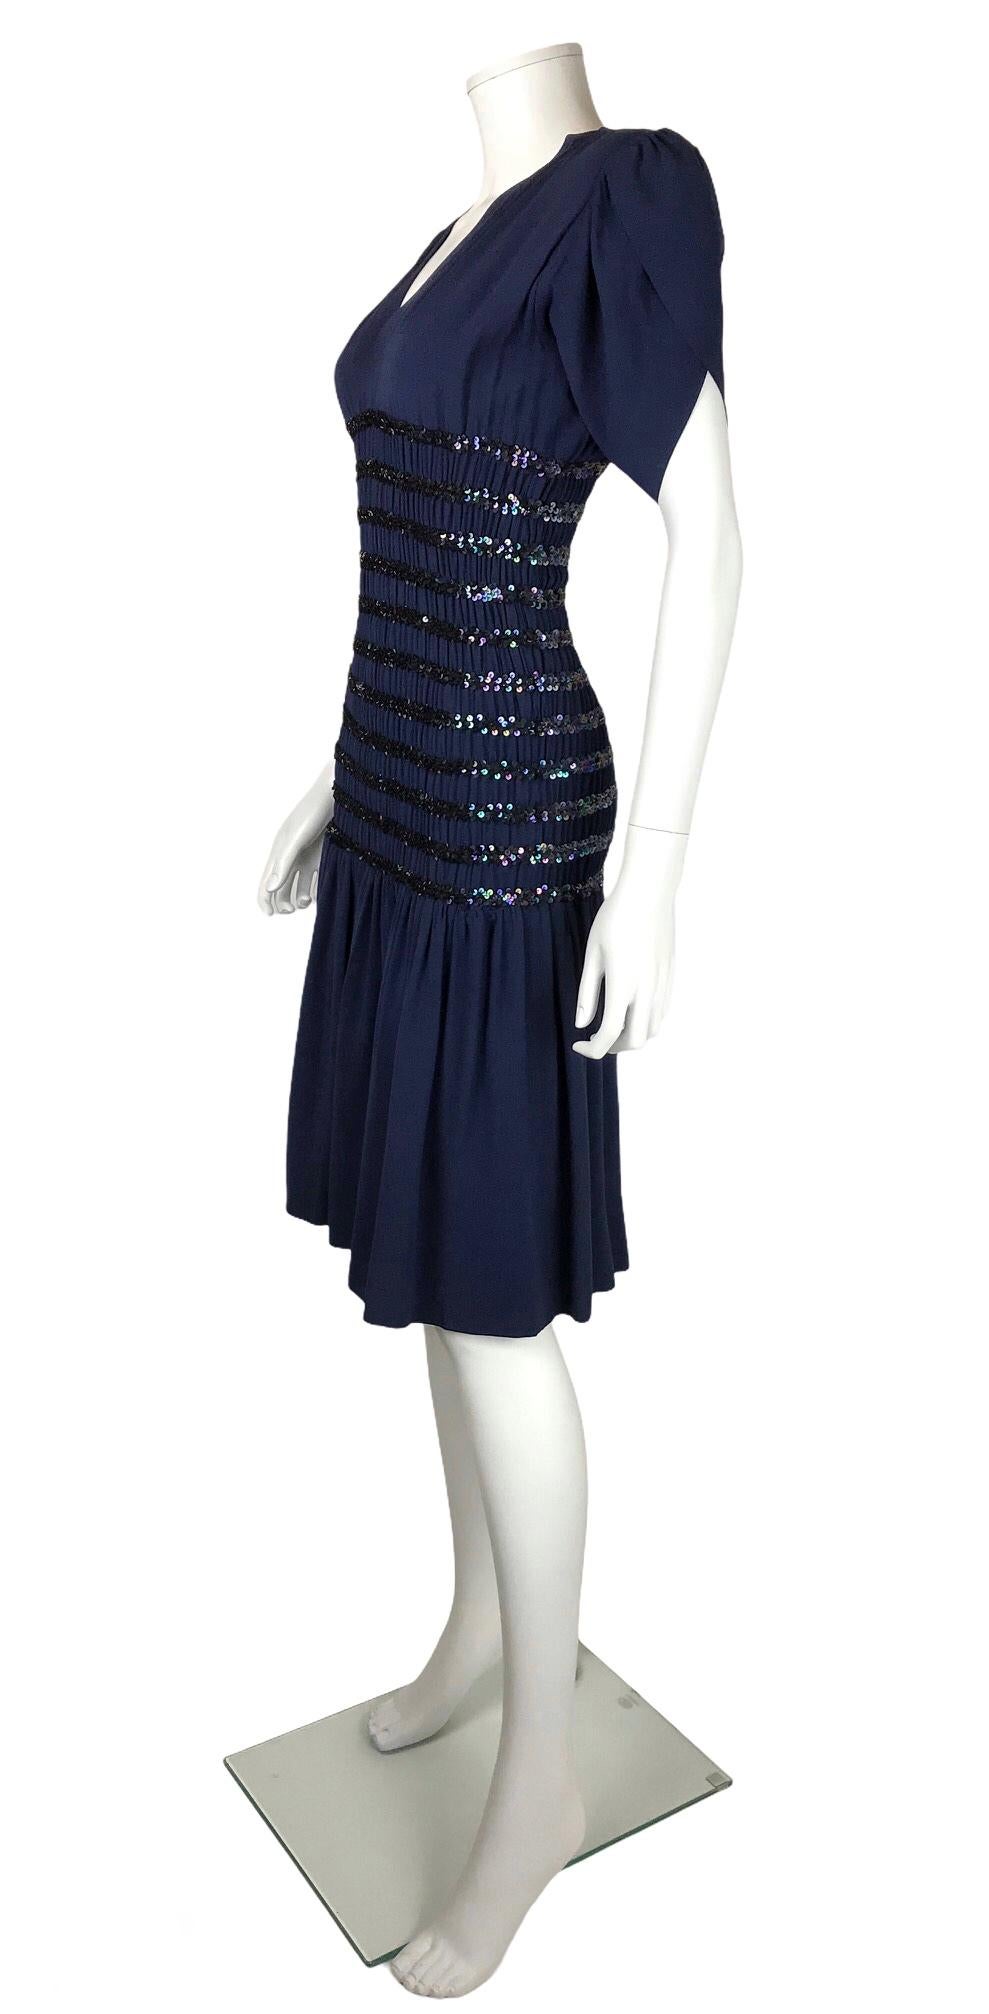 SAINT LAURENT Rive Gauche, 1983. 
Crepe de chine cocktail dress embroidered with sequins. Smocked waistline that sculpts the figure from the bust to the hips. Reinforced structuring shoulders. Small sewing made in the neckline visible in